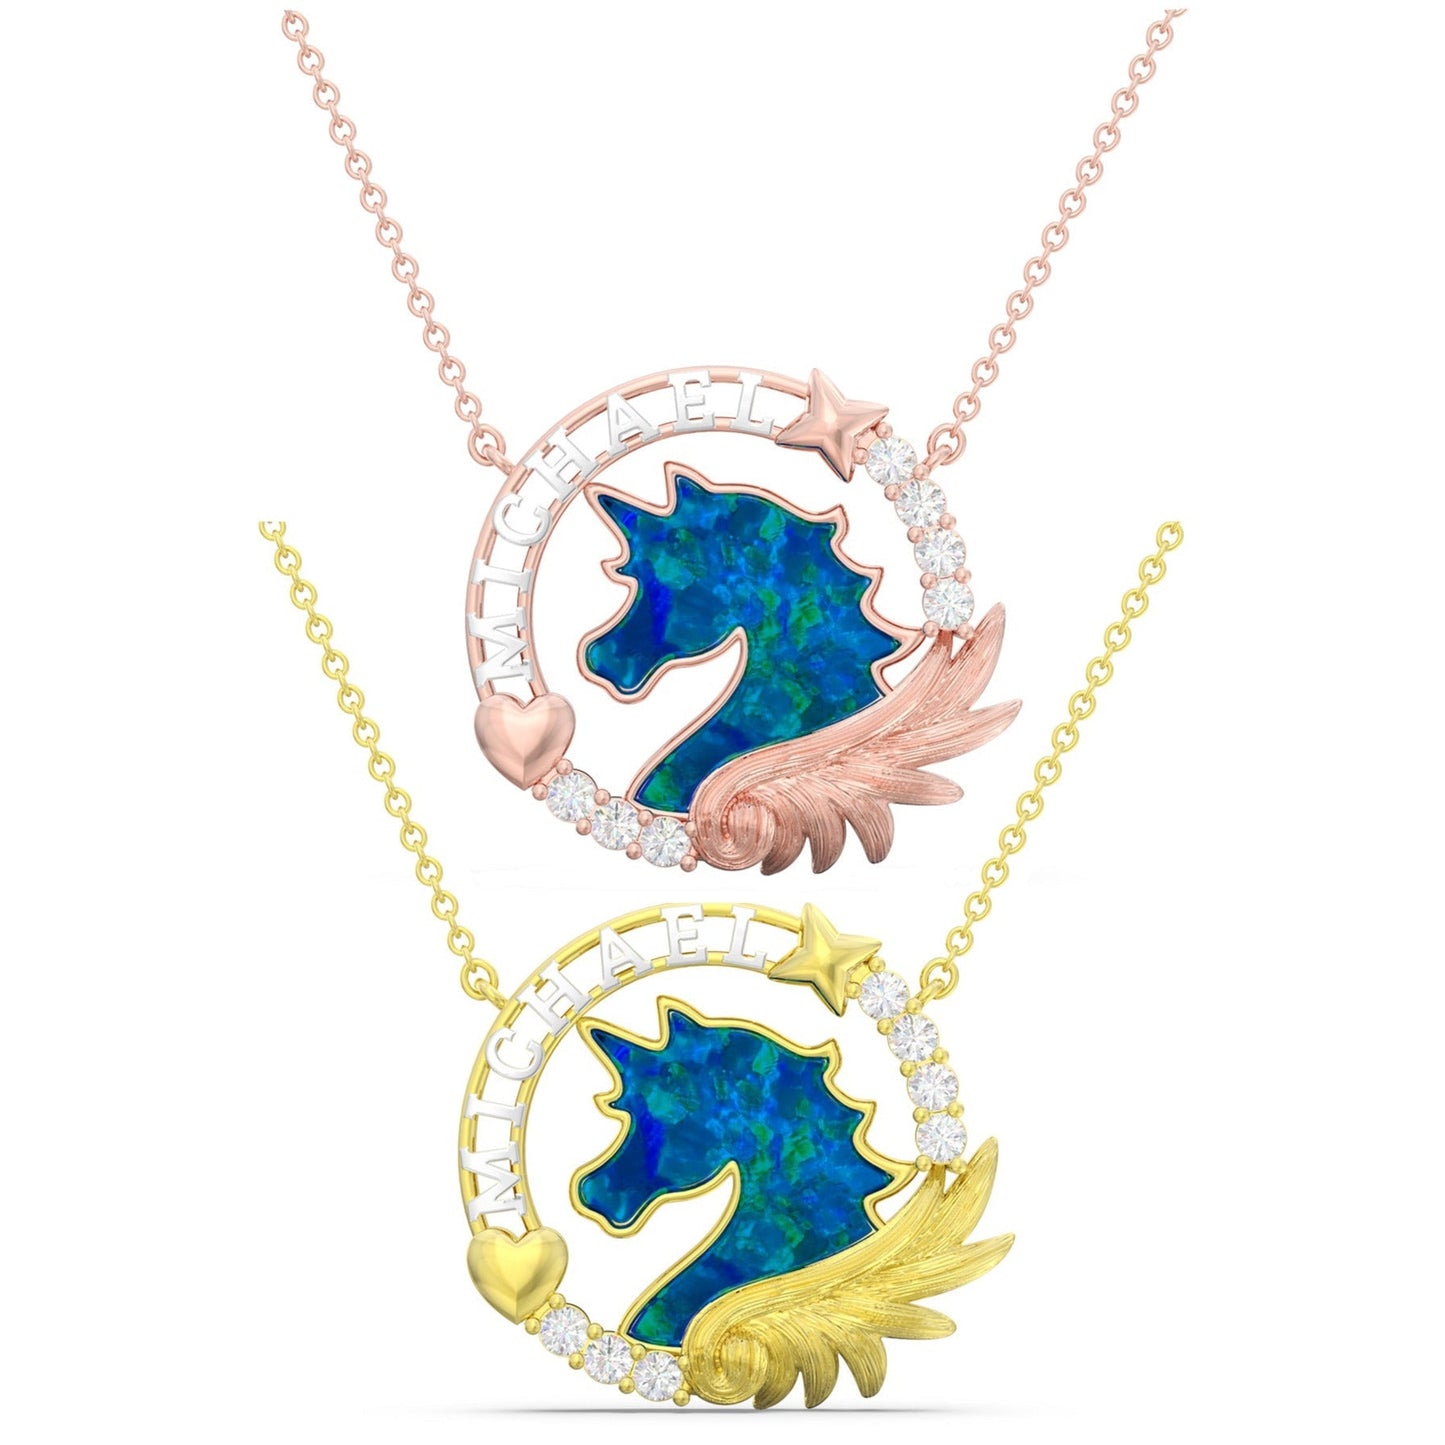 ThinkEngraved engraved necklace Personalized Blue opal Unicorn Gold Necklace With 3d Name Cut Out